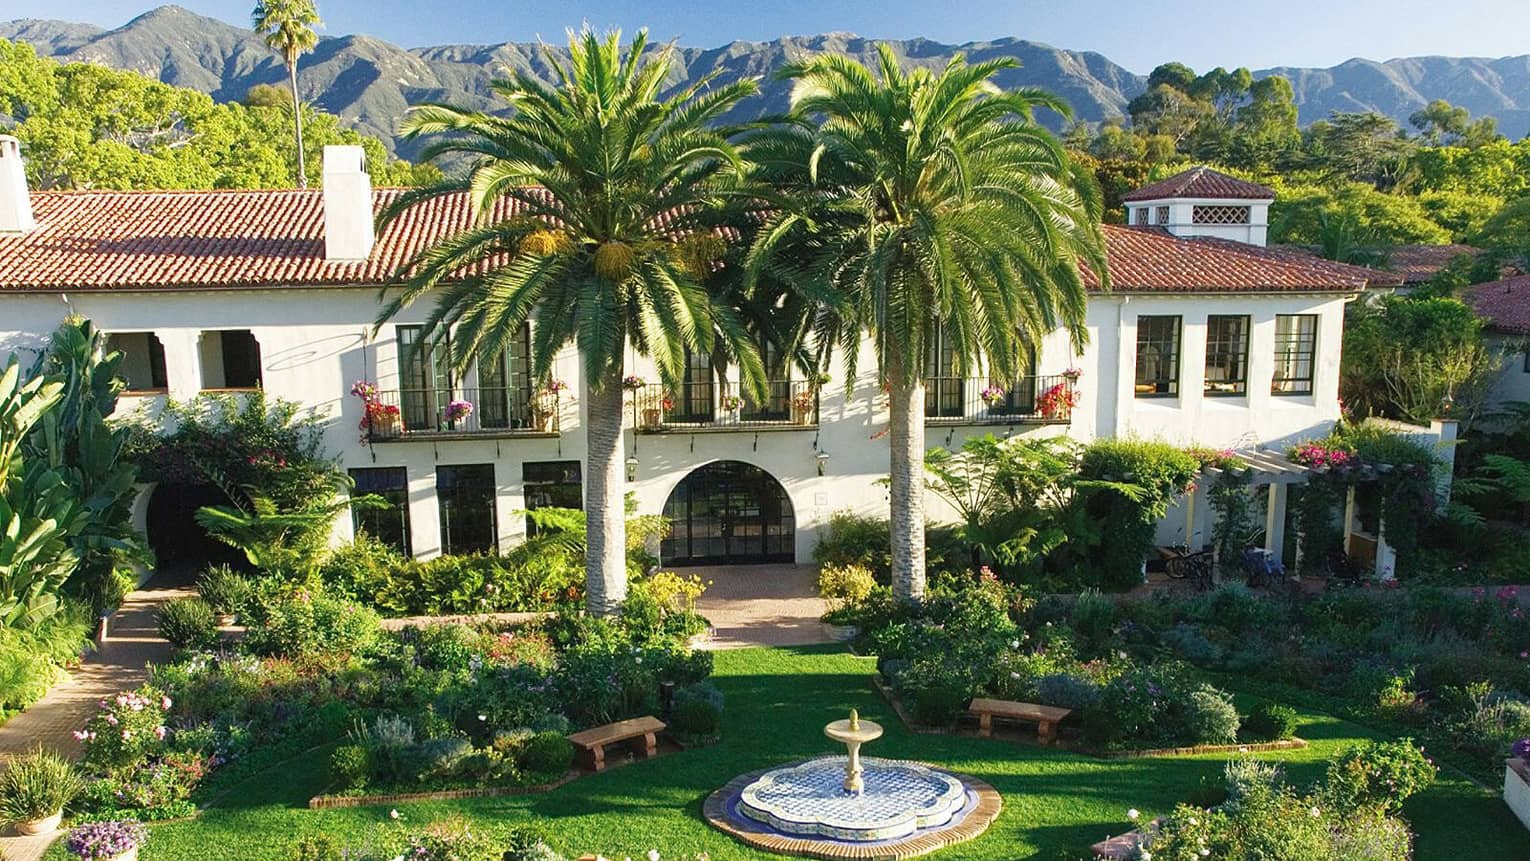 Lush green courtyard with a fountain in the center, flanked by two large palm trees and a Spanish Colonial-style building in the background, overlooking the mountains